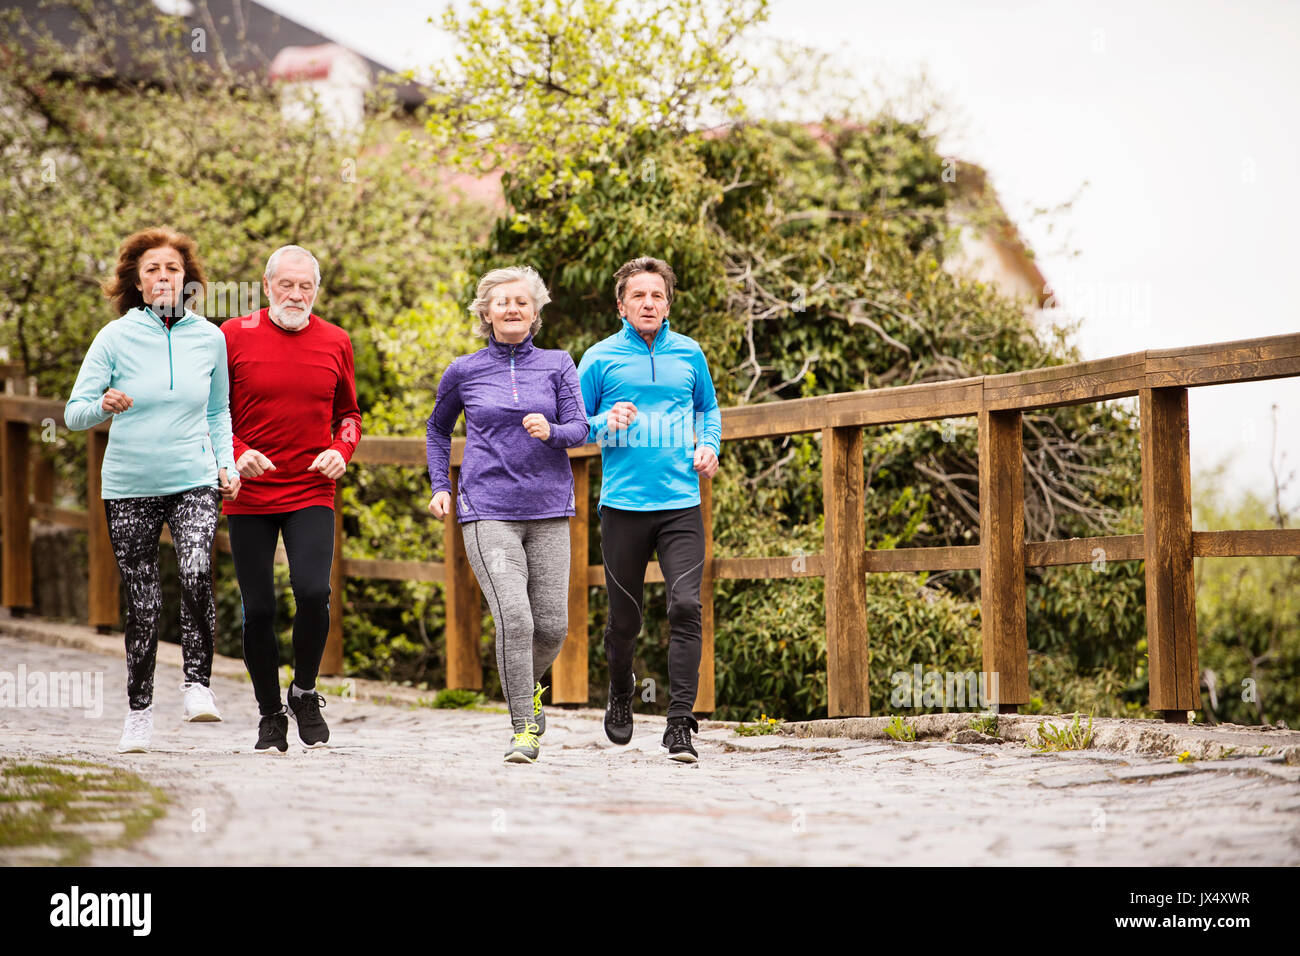 Group of active seniors running together outdoors in the old town of Banska Stiavnica in Slovakia. Stock Photo